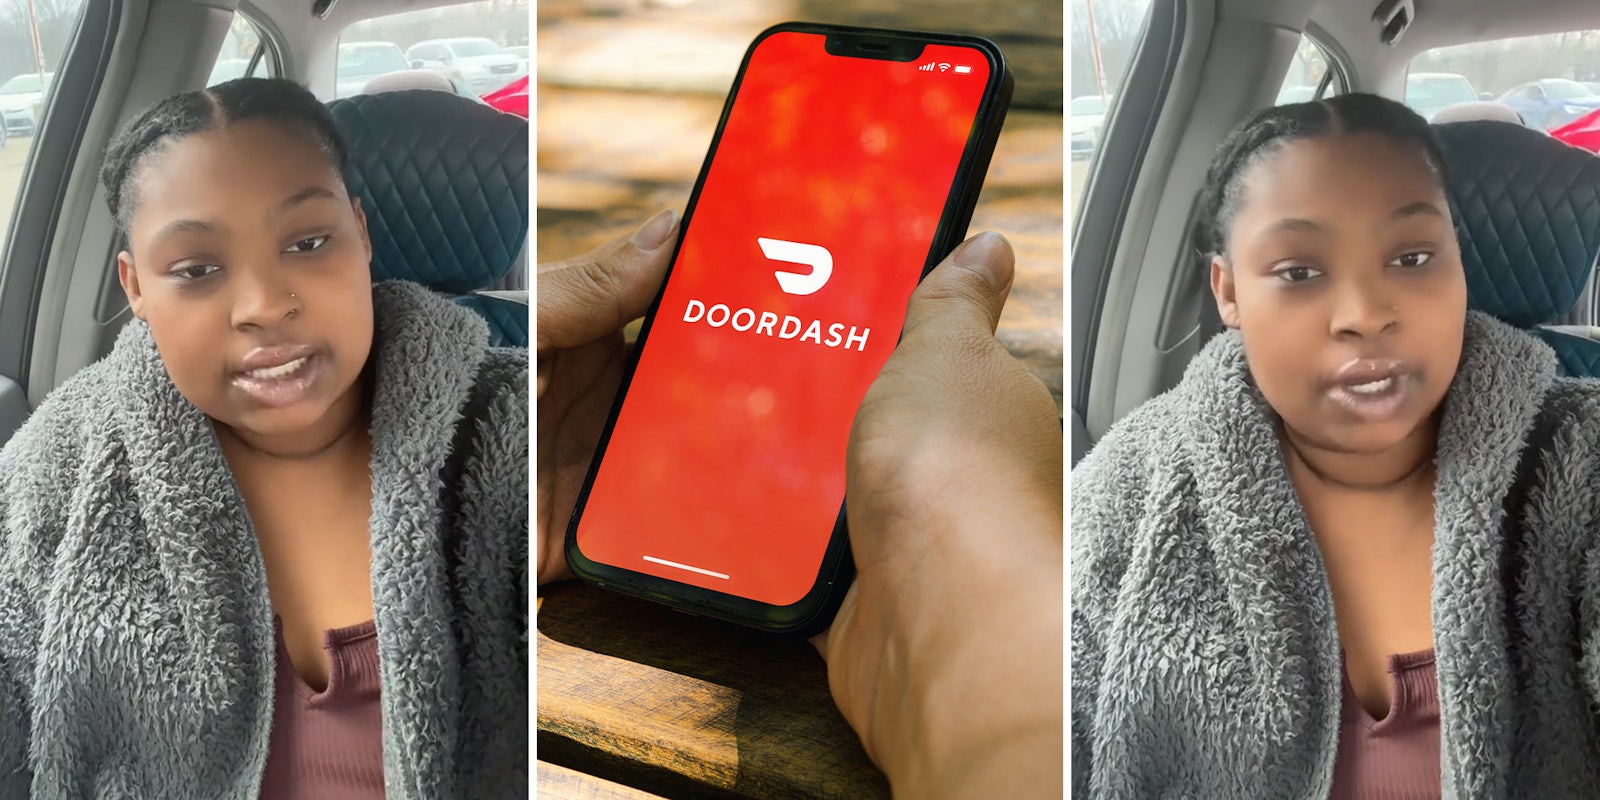 DoorDash customer warns of driver photo scam after Pizza Hut order fail